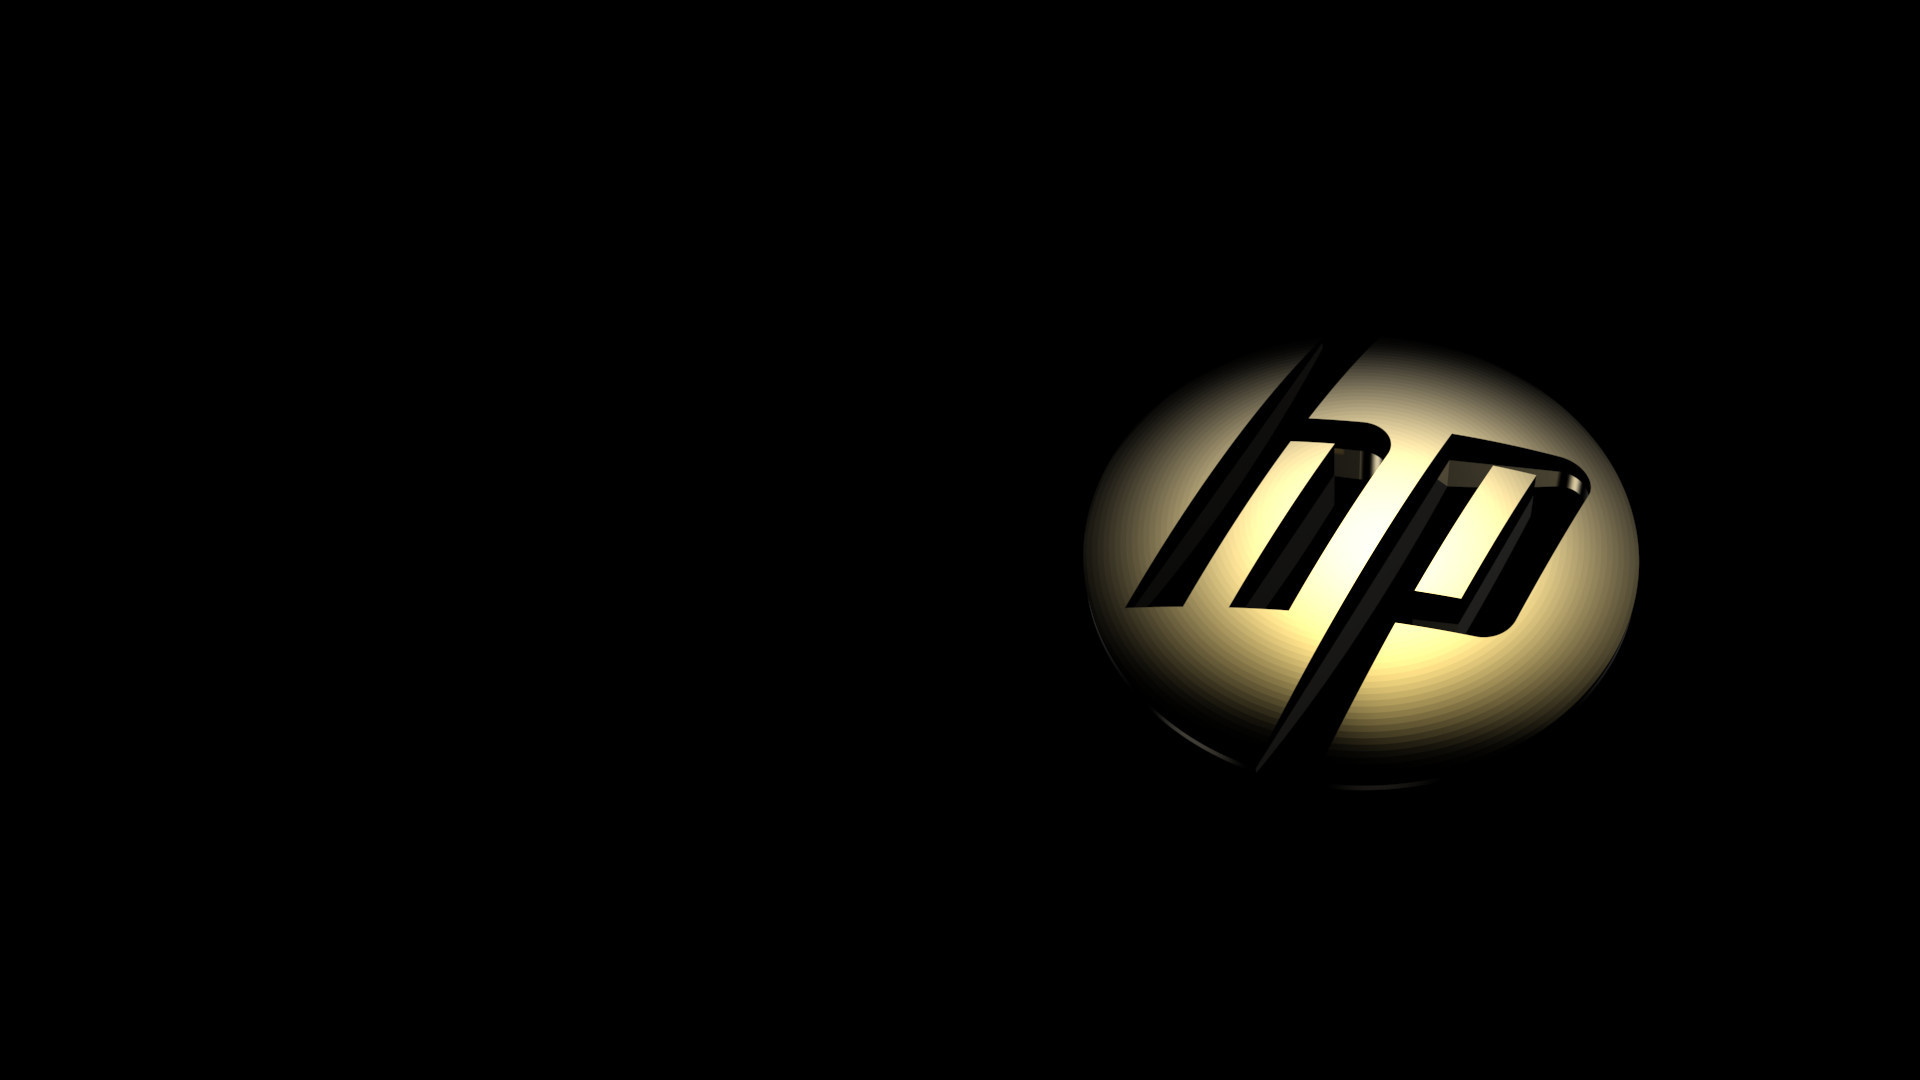 1920x1080 1920x1200 Live Wallpapers for HP Laptop | HD Wallpapers | Pinterest | Live  wallpapers and Wallpaper